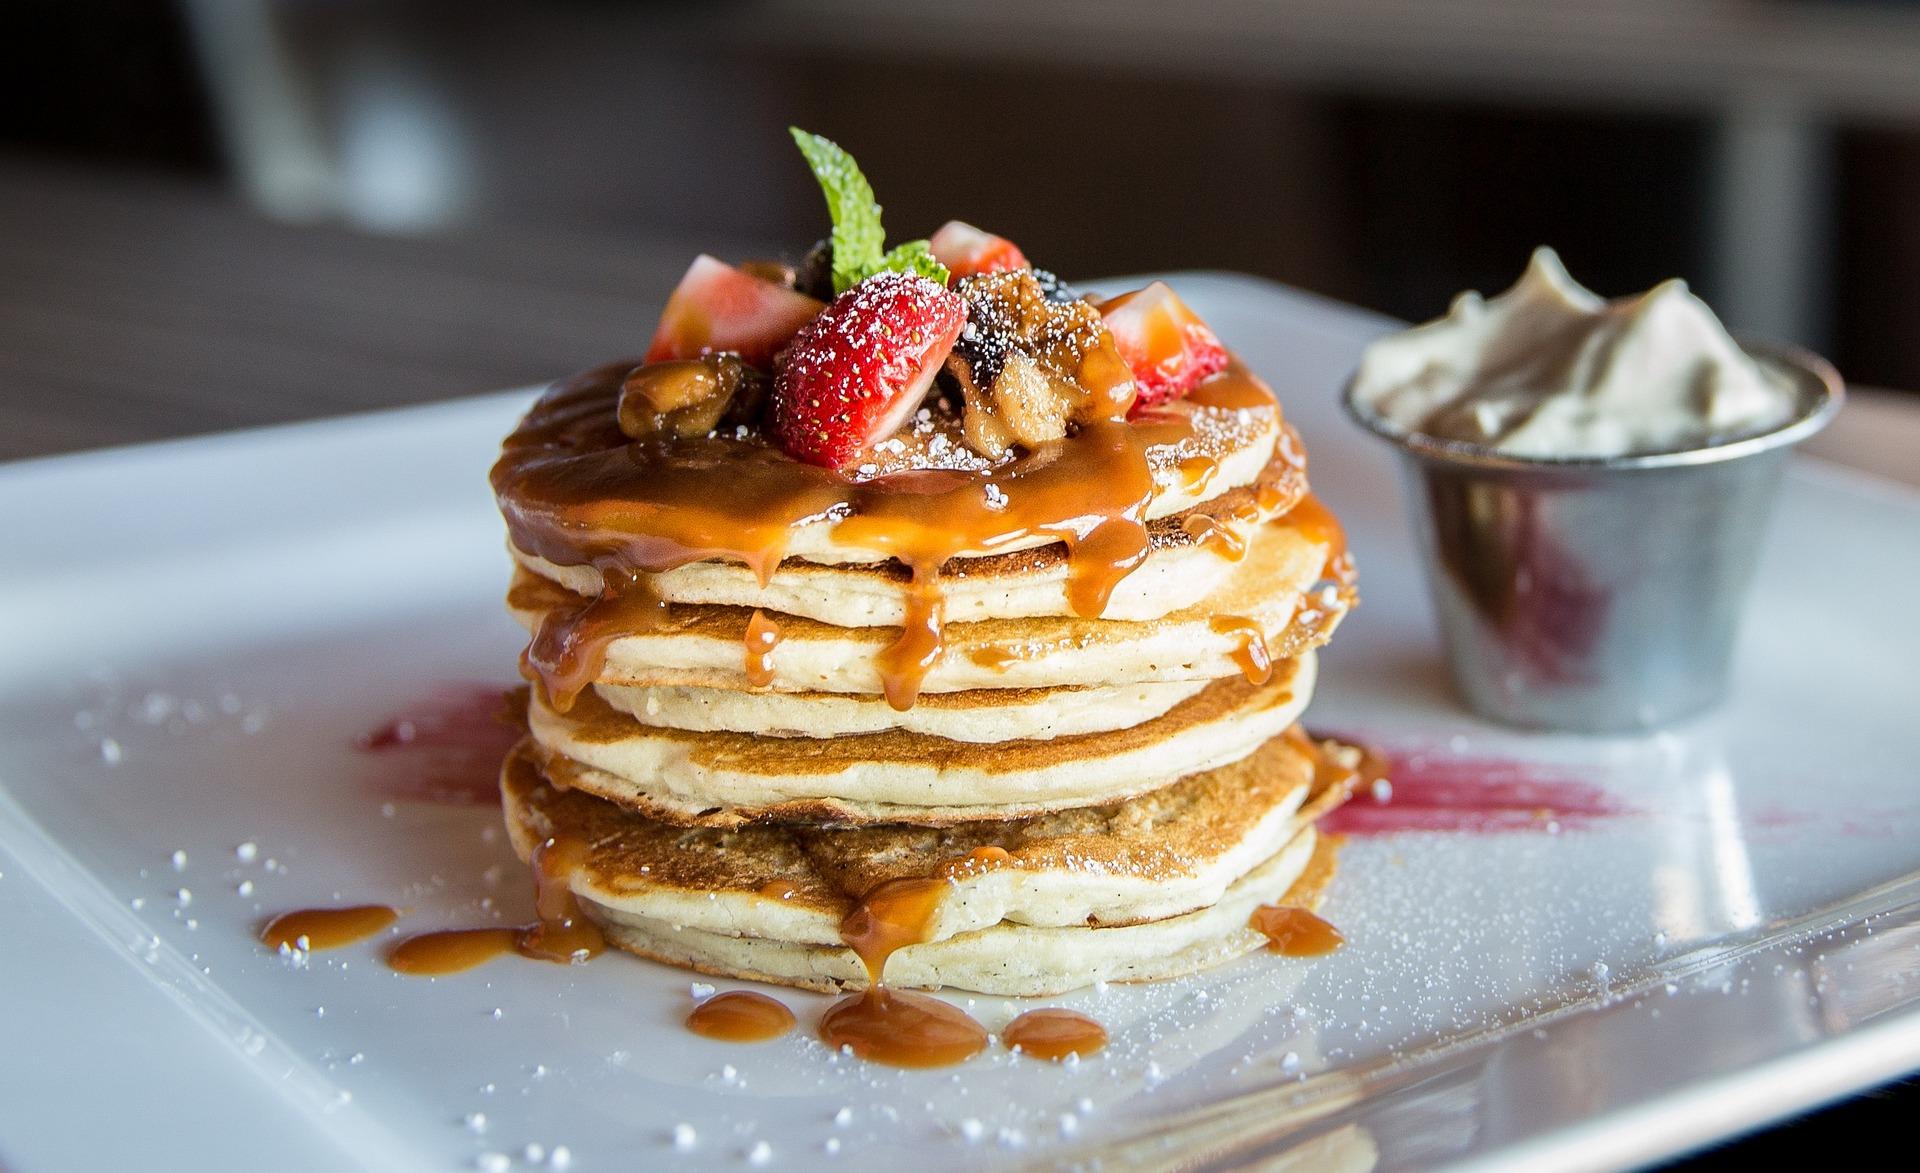 A stack of pancakes with fruit and whipped cream.